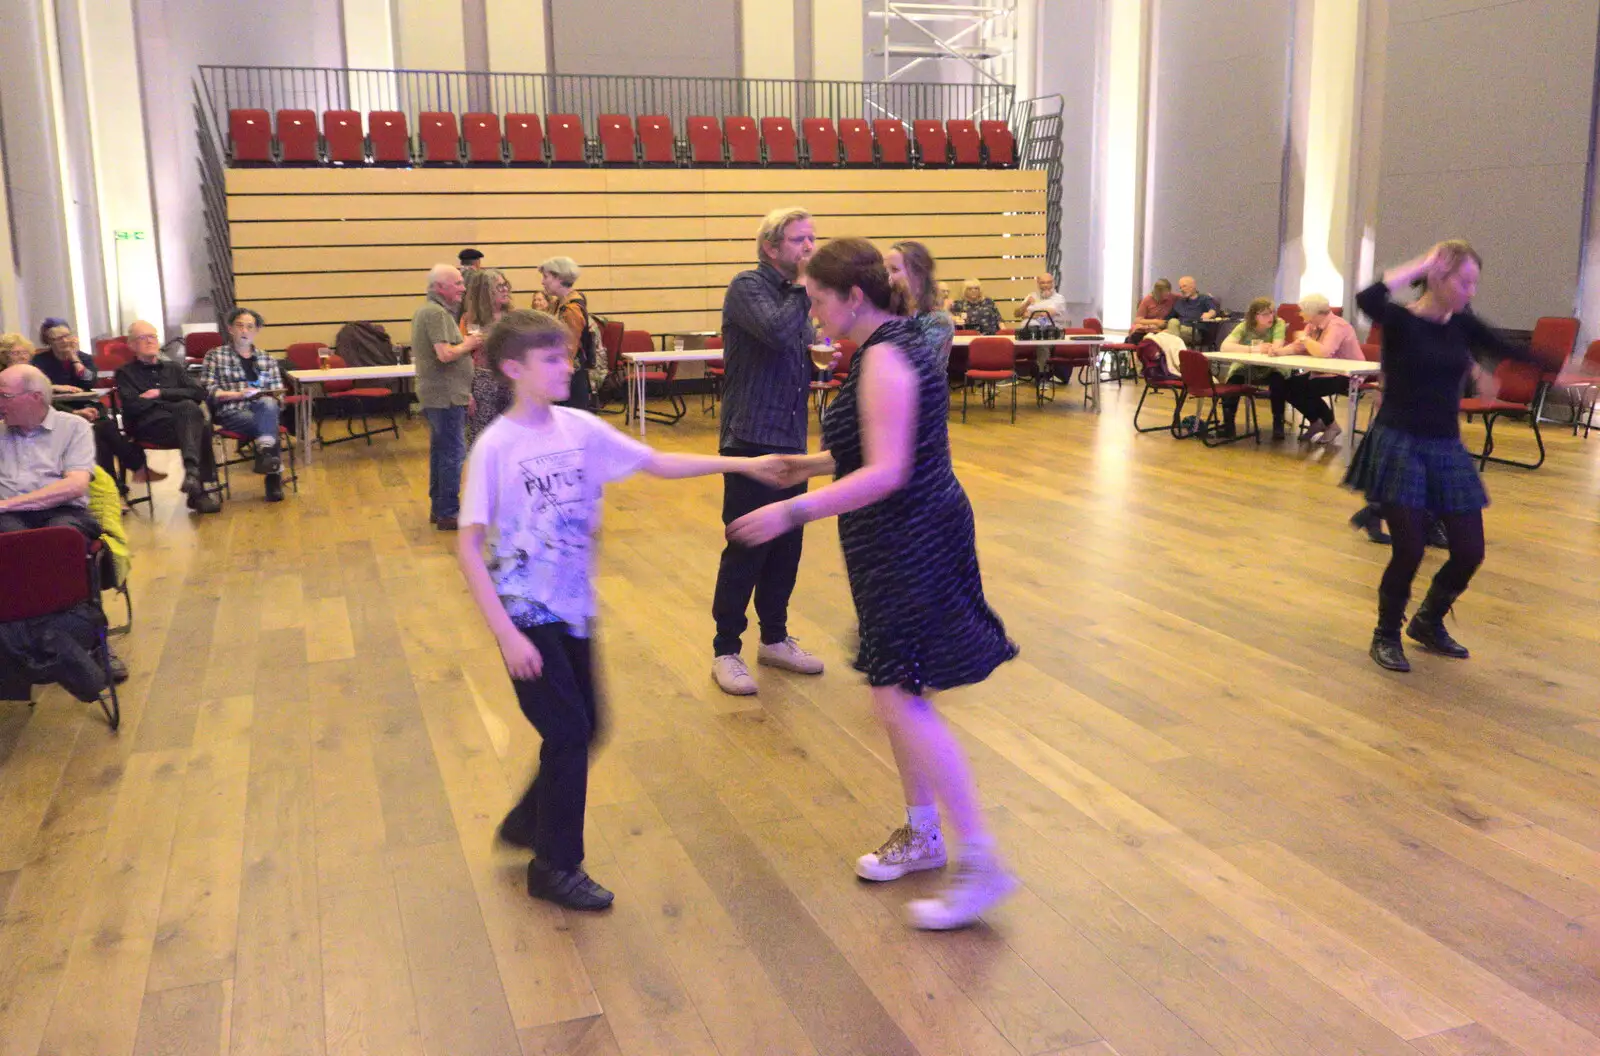 Harry and Isobel have a dance, from DesignerMakers' Fund-Raising Ceilidh, The Cornhall, Diss - 13th May 2023